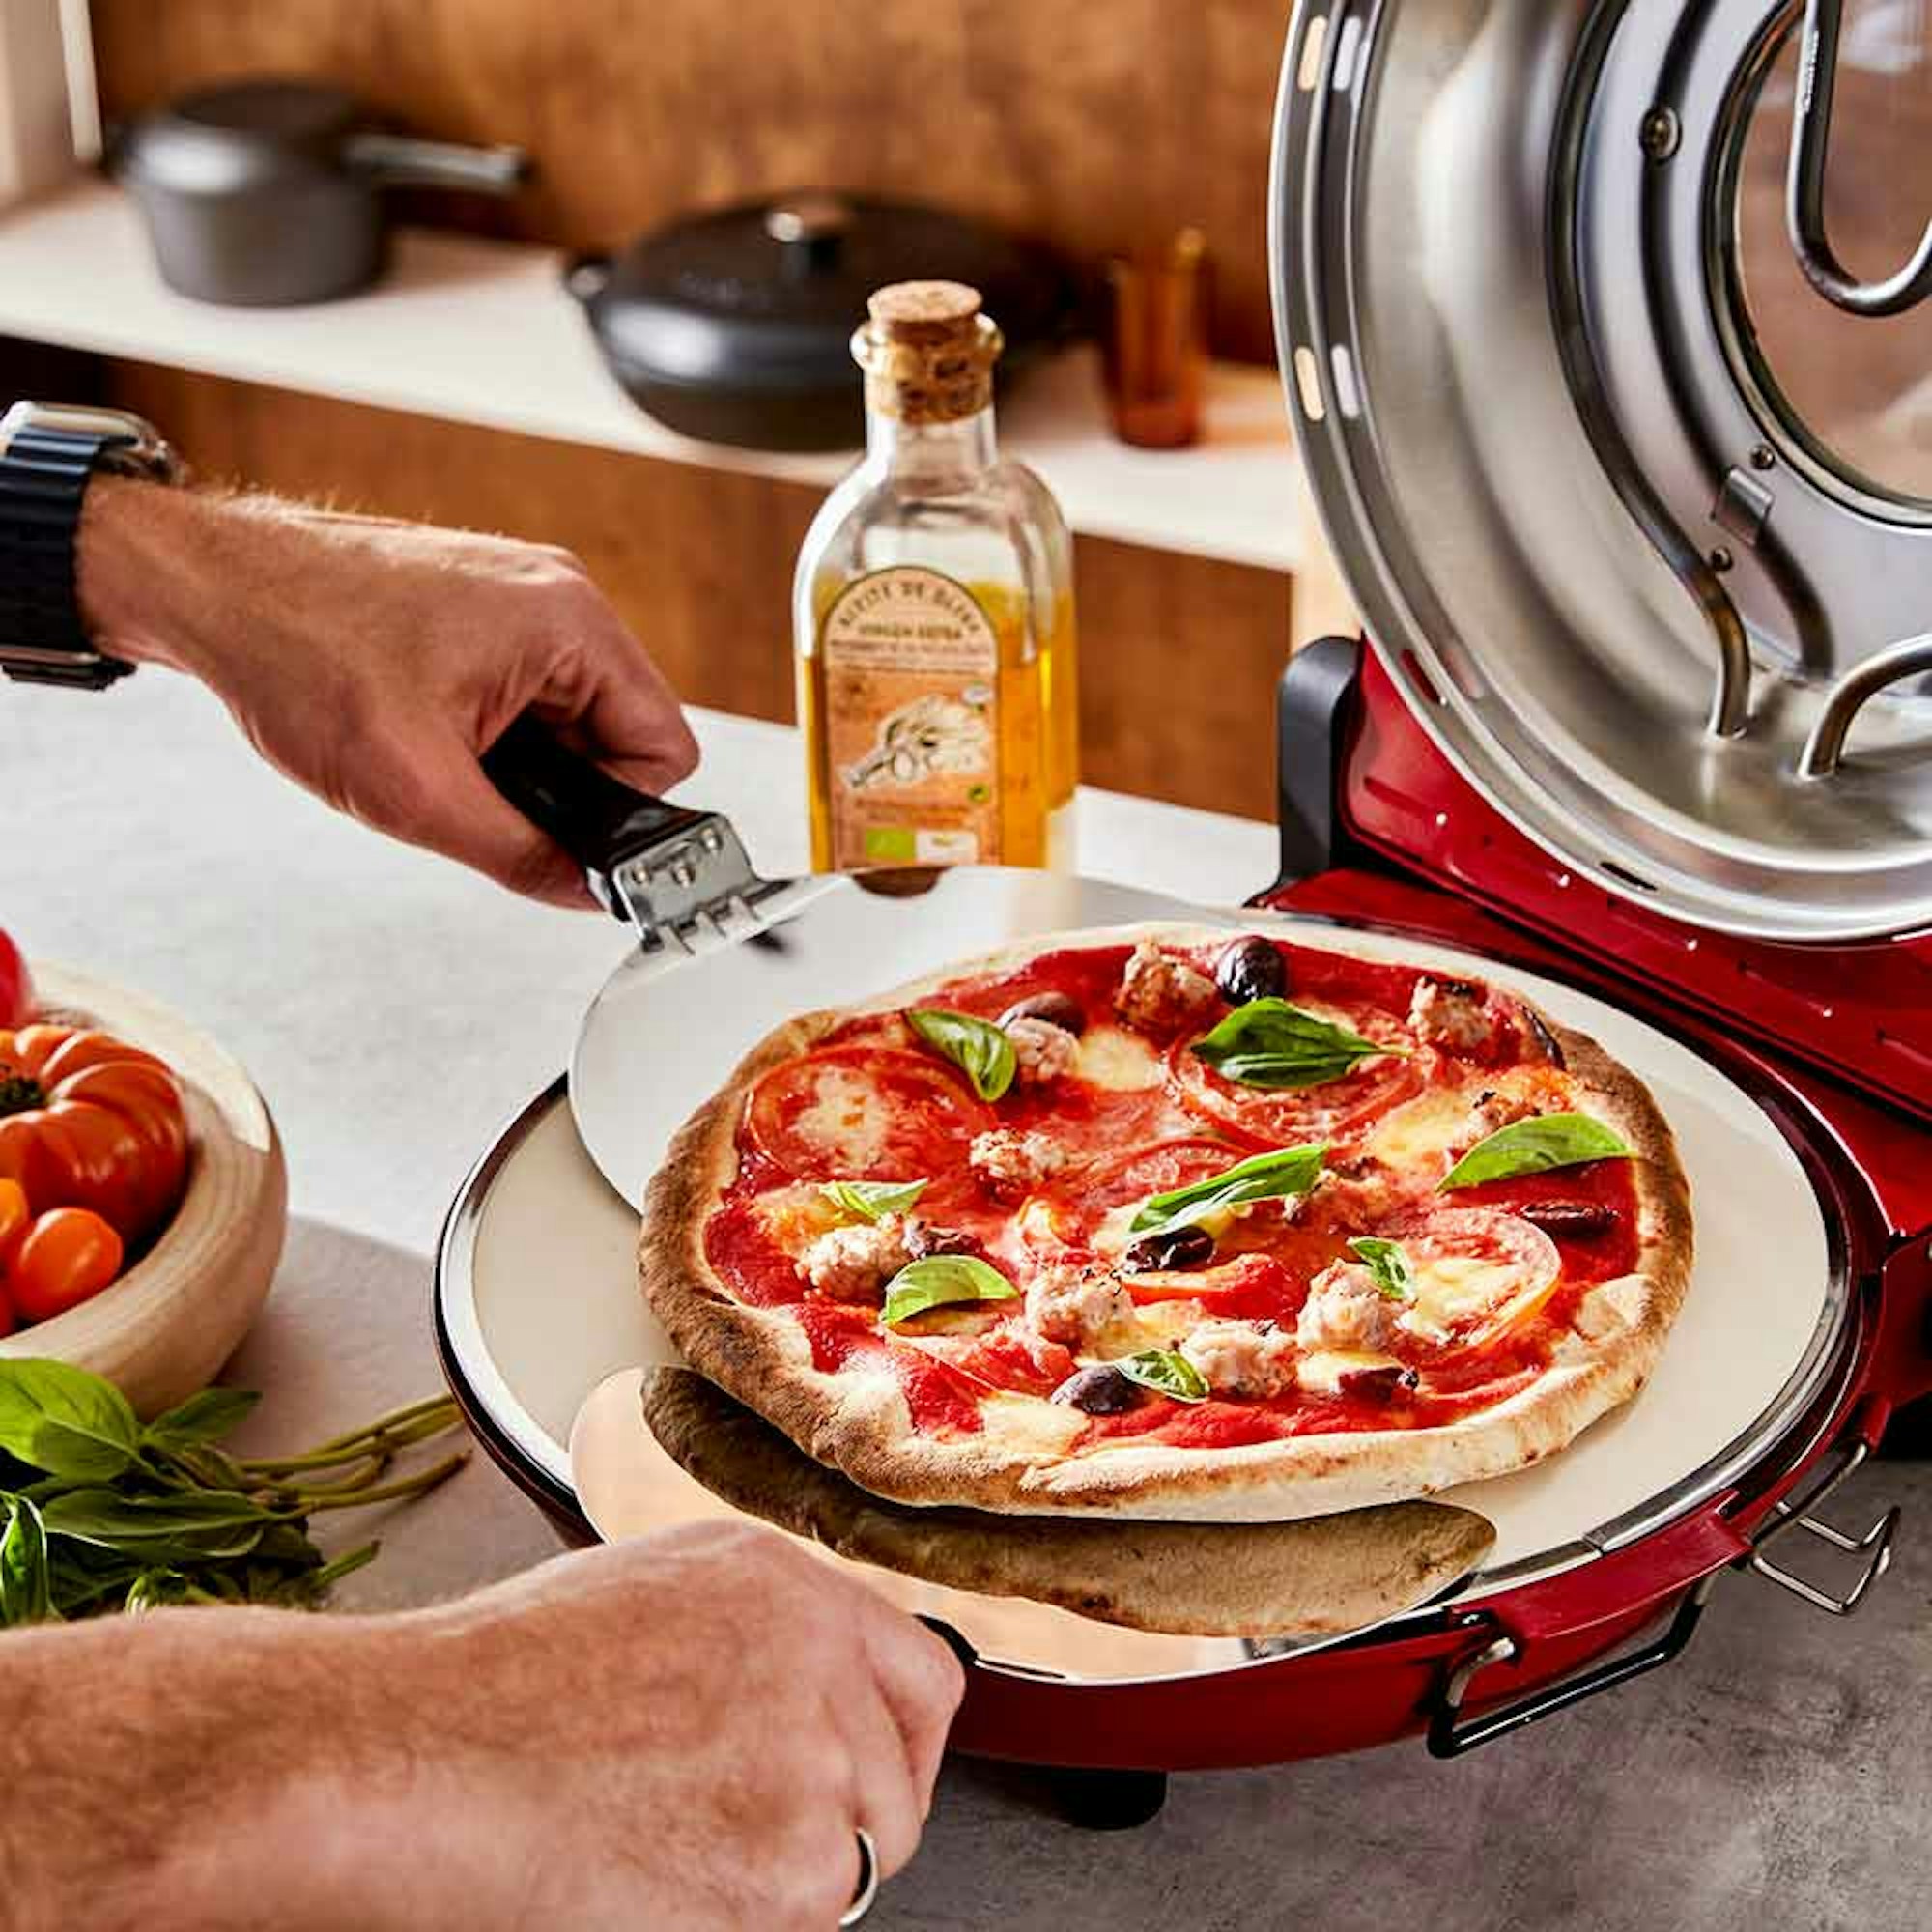 How do you slide pizza onto a hot pizza stone? man lifting pizza from a pizza oven